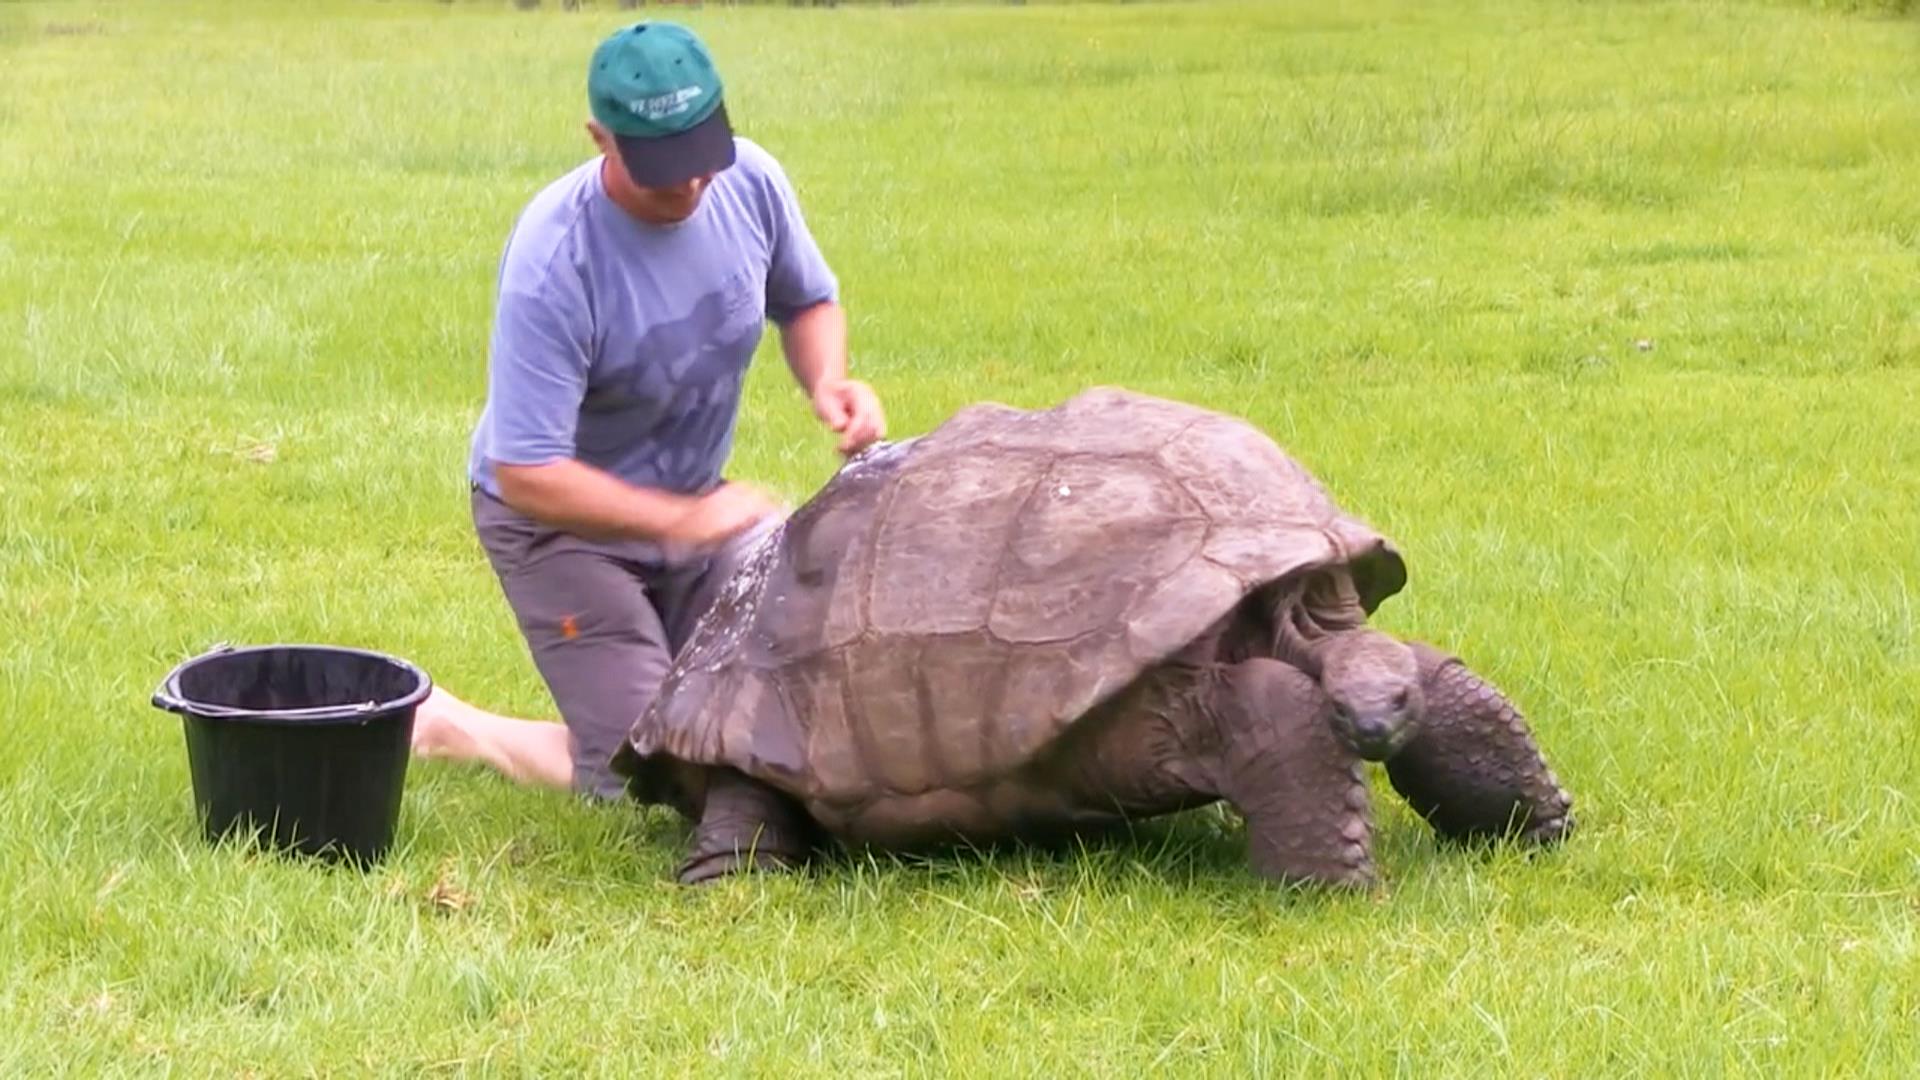 Jonathan the Giant Tortoise Finally Gets a Bath After 184 Years